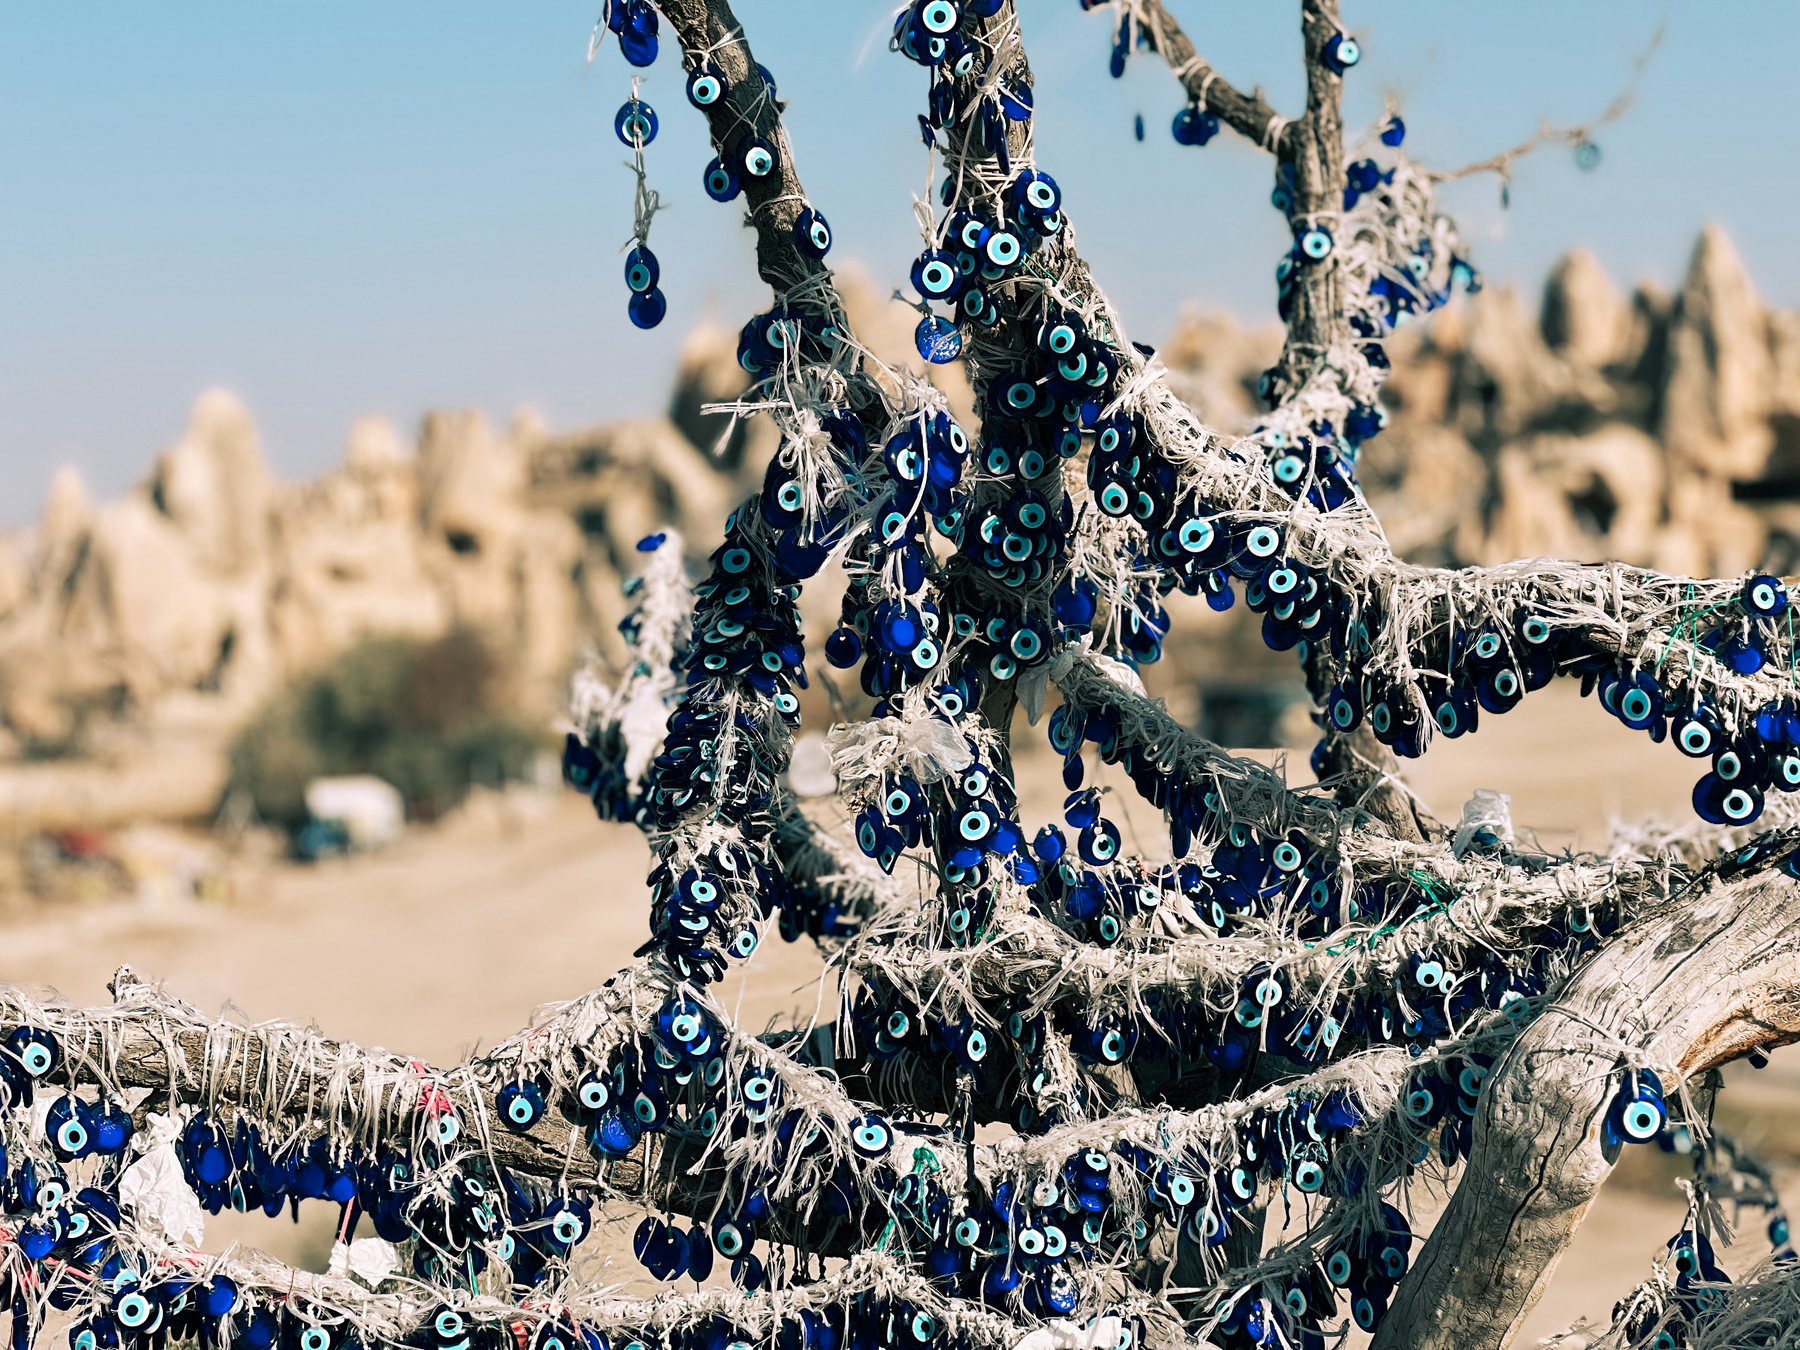 A tree adorned with numerous blue evil eye amulets, set against a backdrop of rocky terrain.